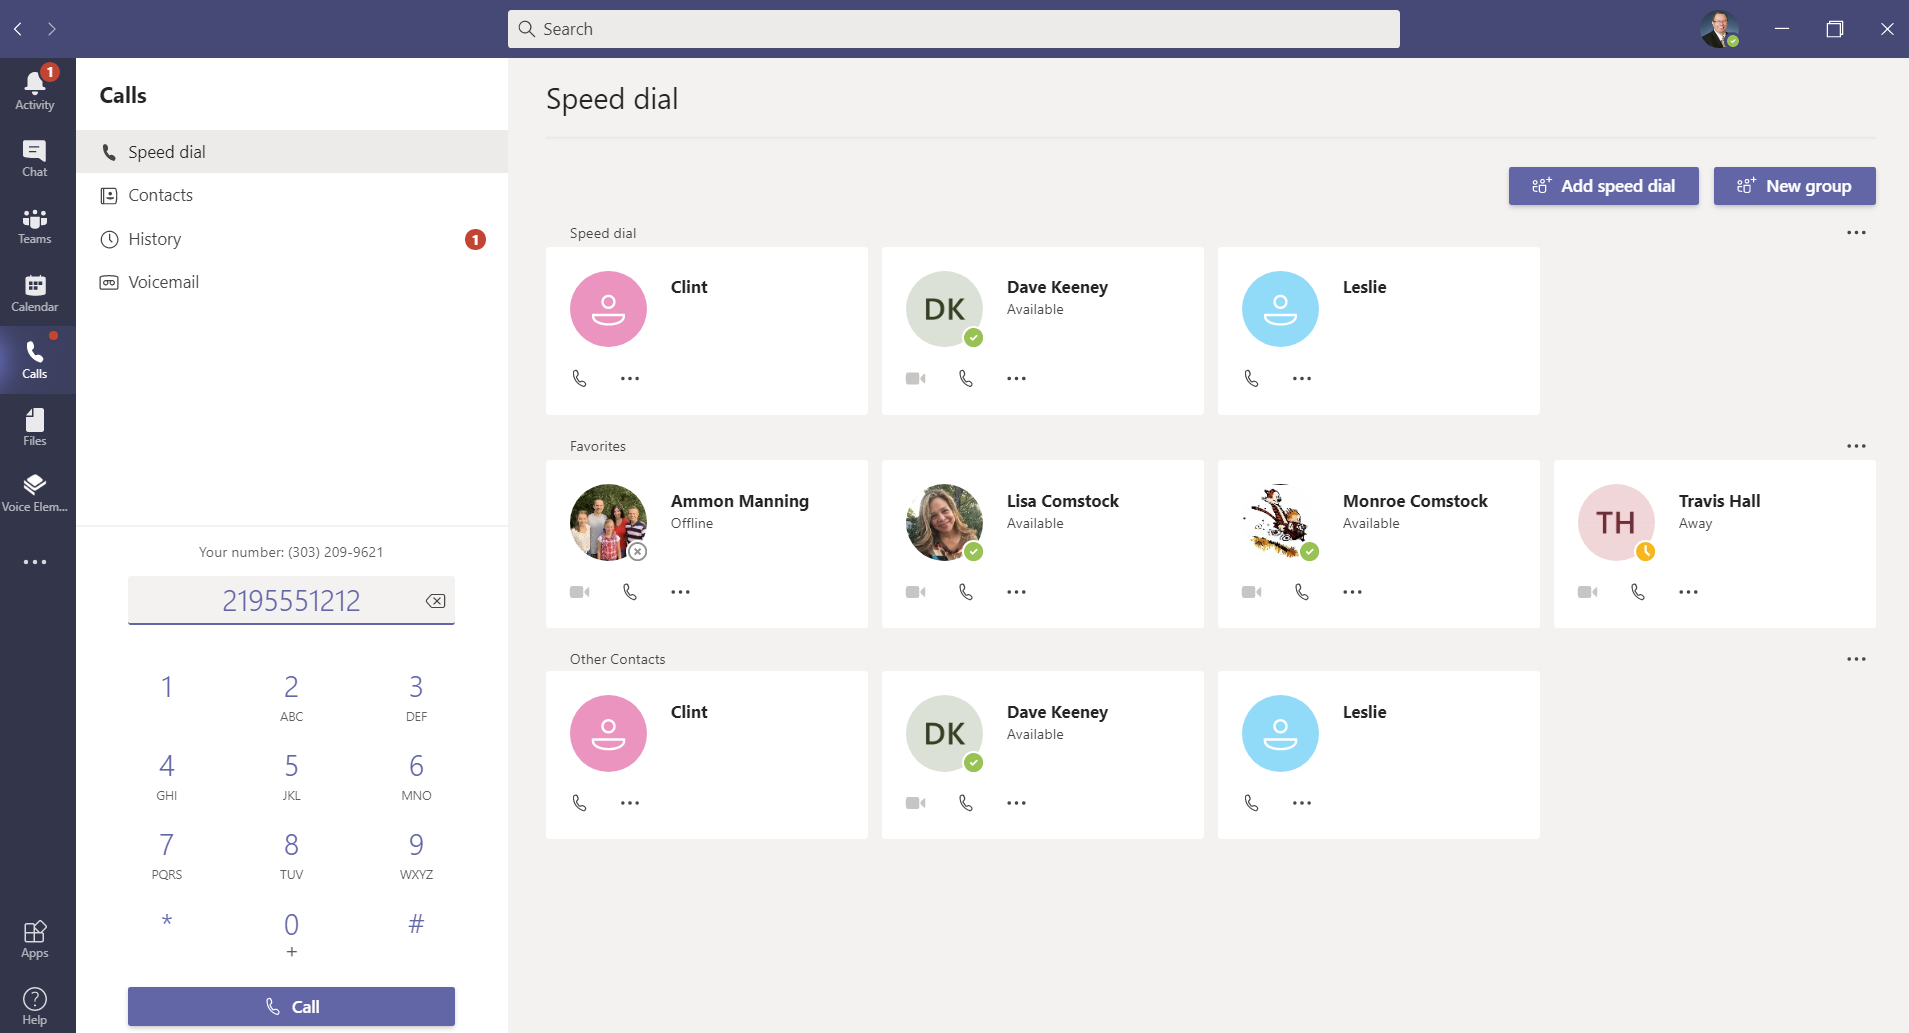 Voice Elements' Microsoft Teams Calling Plan - Speed Dial